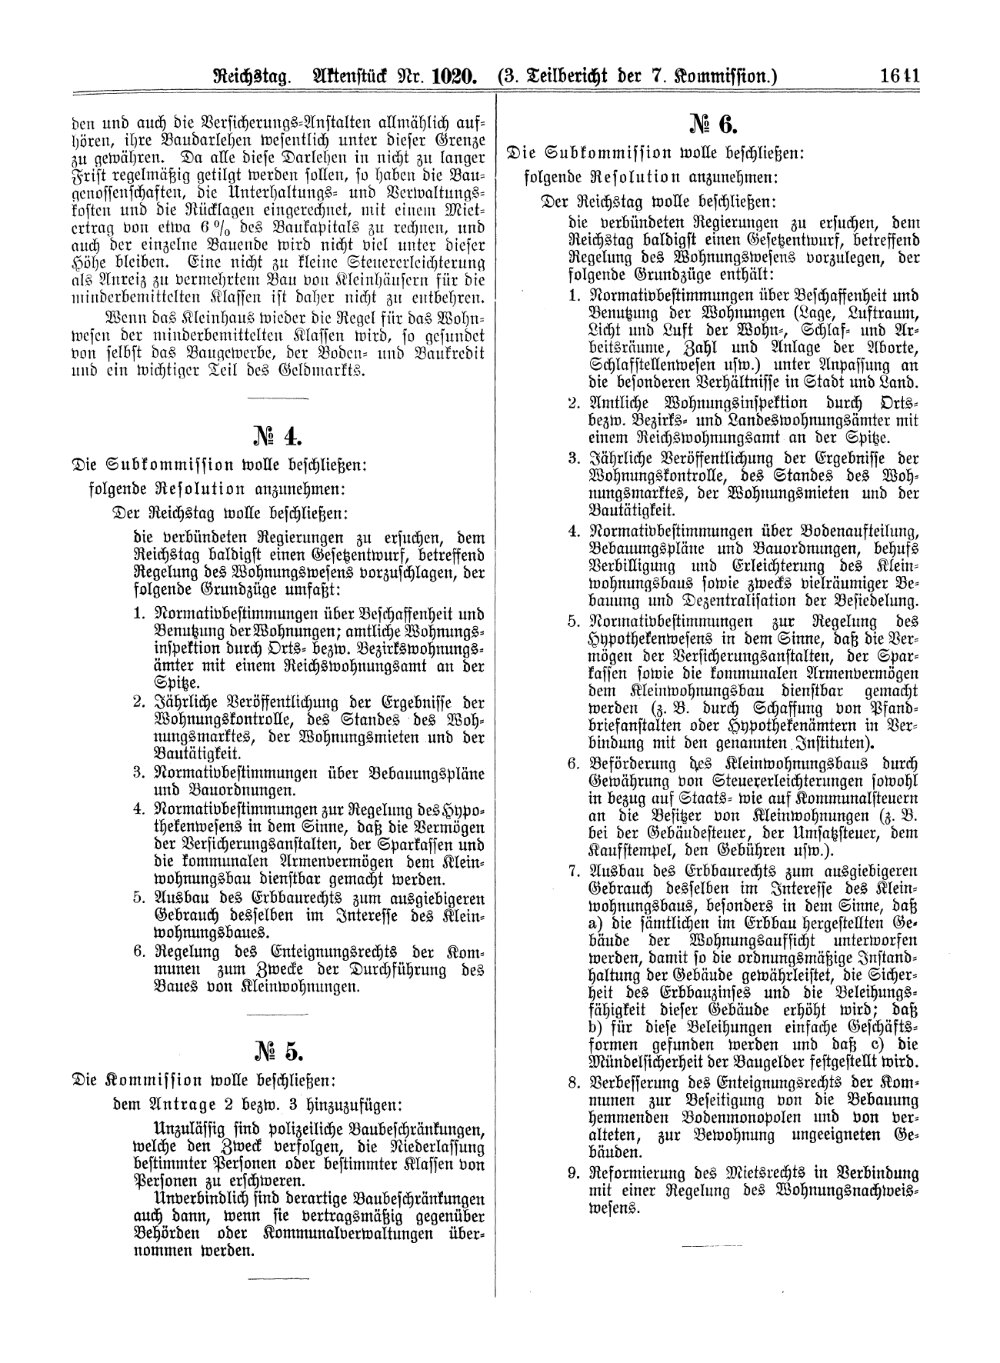 Scan of page 1641